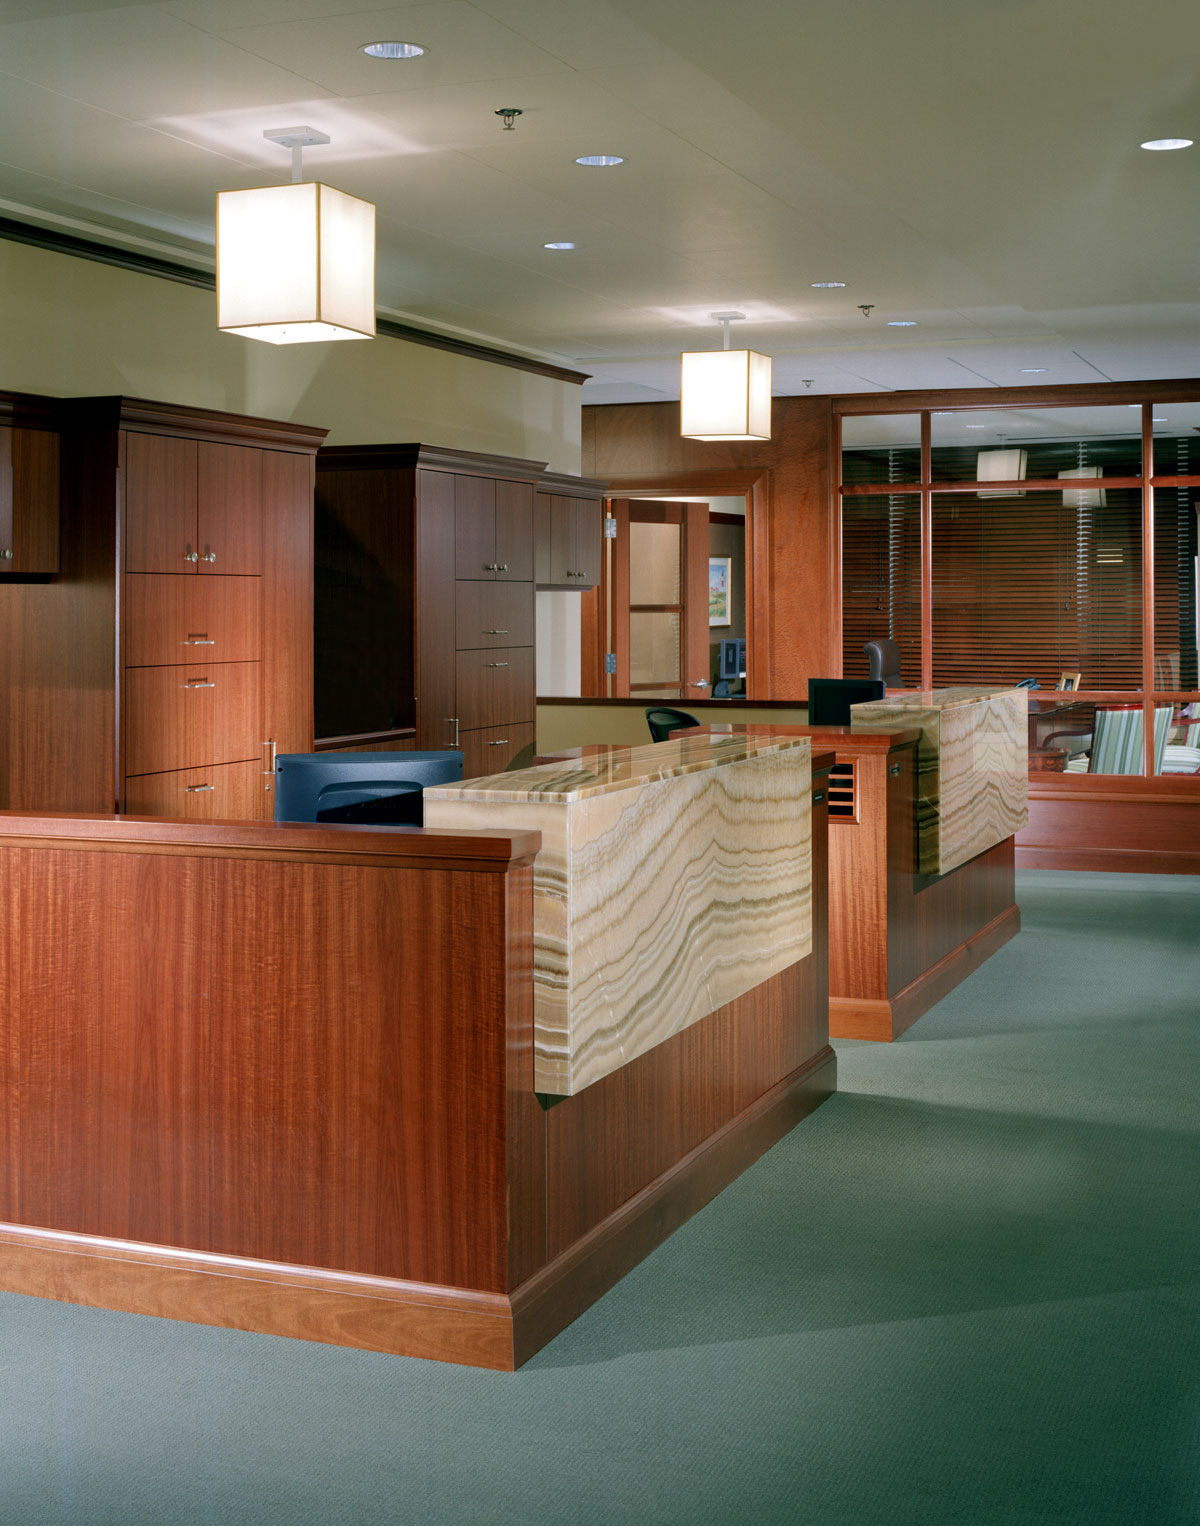 These custom wood built-ins will stand the test of time. We eventually did a further renovation of Bain's office.